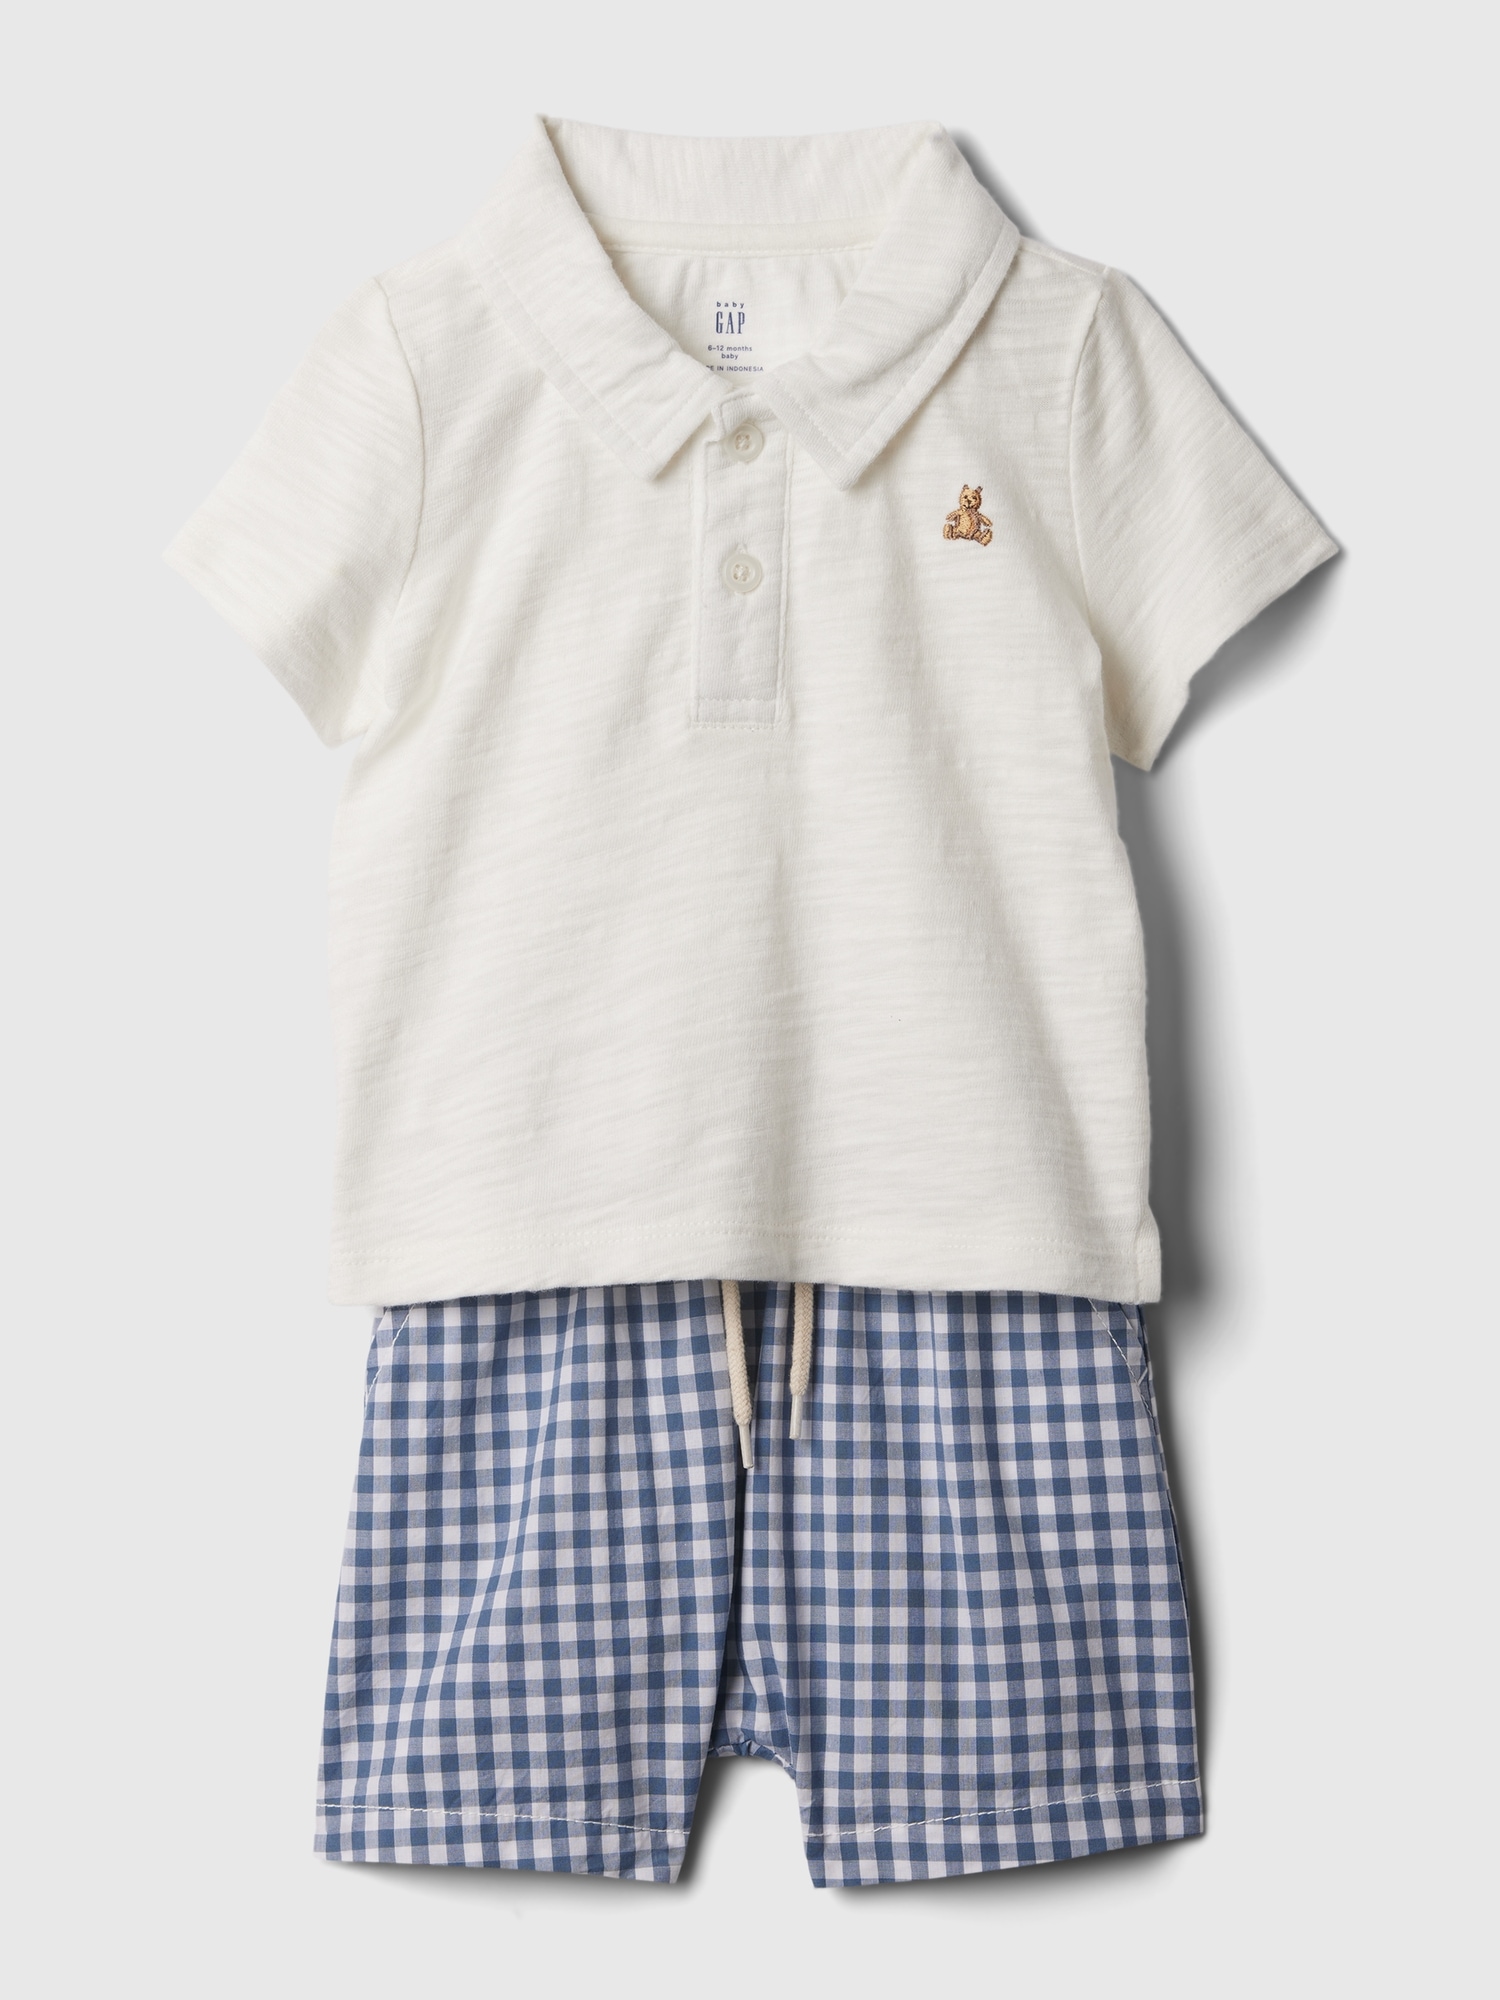 Baby Polo Outfit Set